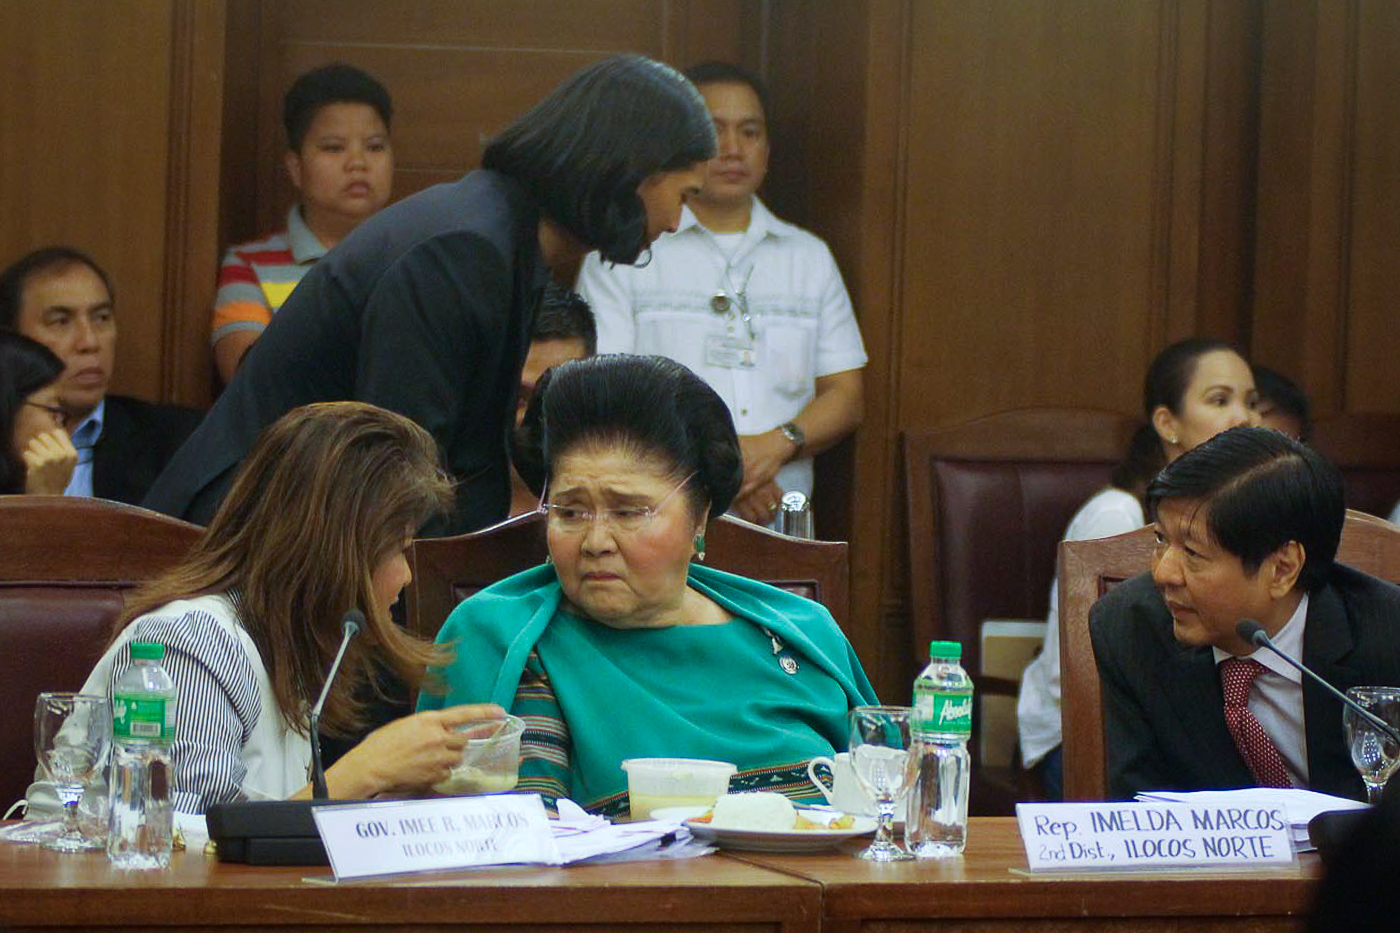 GUILTY MARCOS. Ilocos Norte 2nd District Representative Imelda Marcos (middle)talks to her children, Ilocos Norte Governor Imee Marcos and ex-senator Bongbong Marcos, during a congressional hearing on August 9, 2017. File photo by Darren Langit/Rappler 